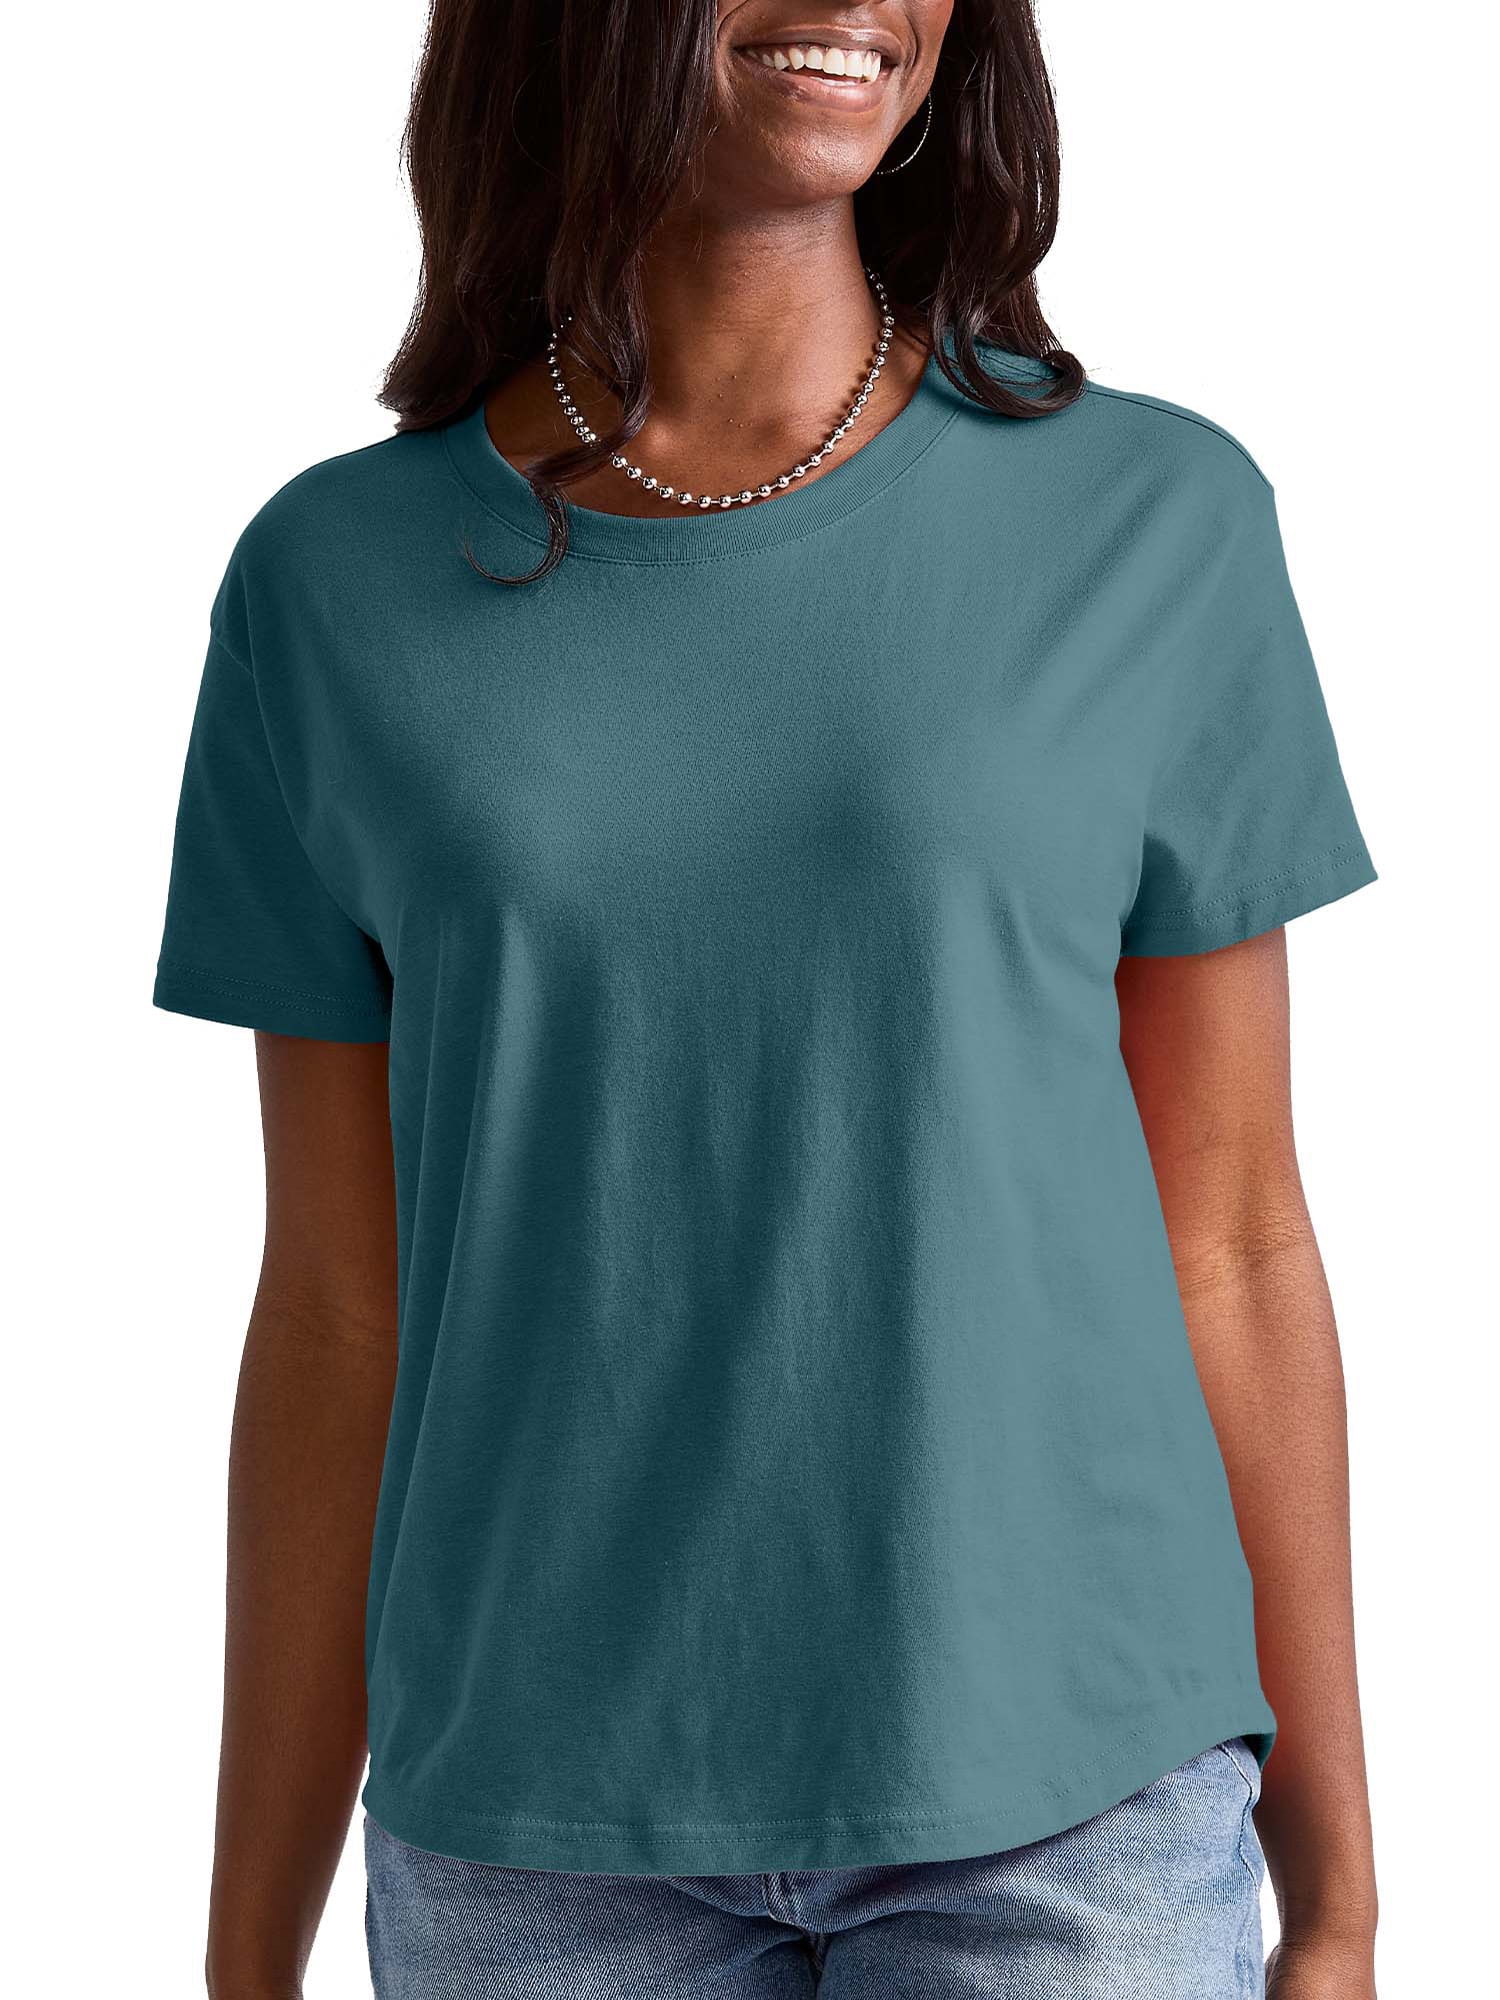 Hanes Originals Women's T-Shirt with Curved Hem, 100% Cotton Relaxed-Fit  Tee 